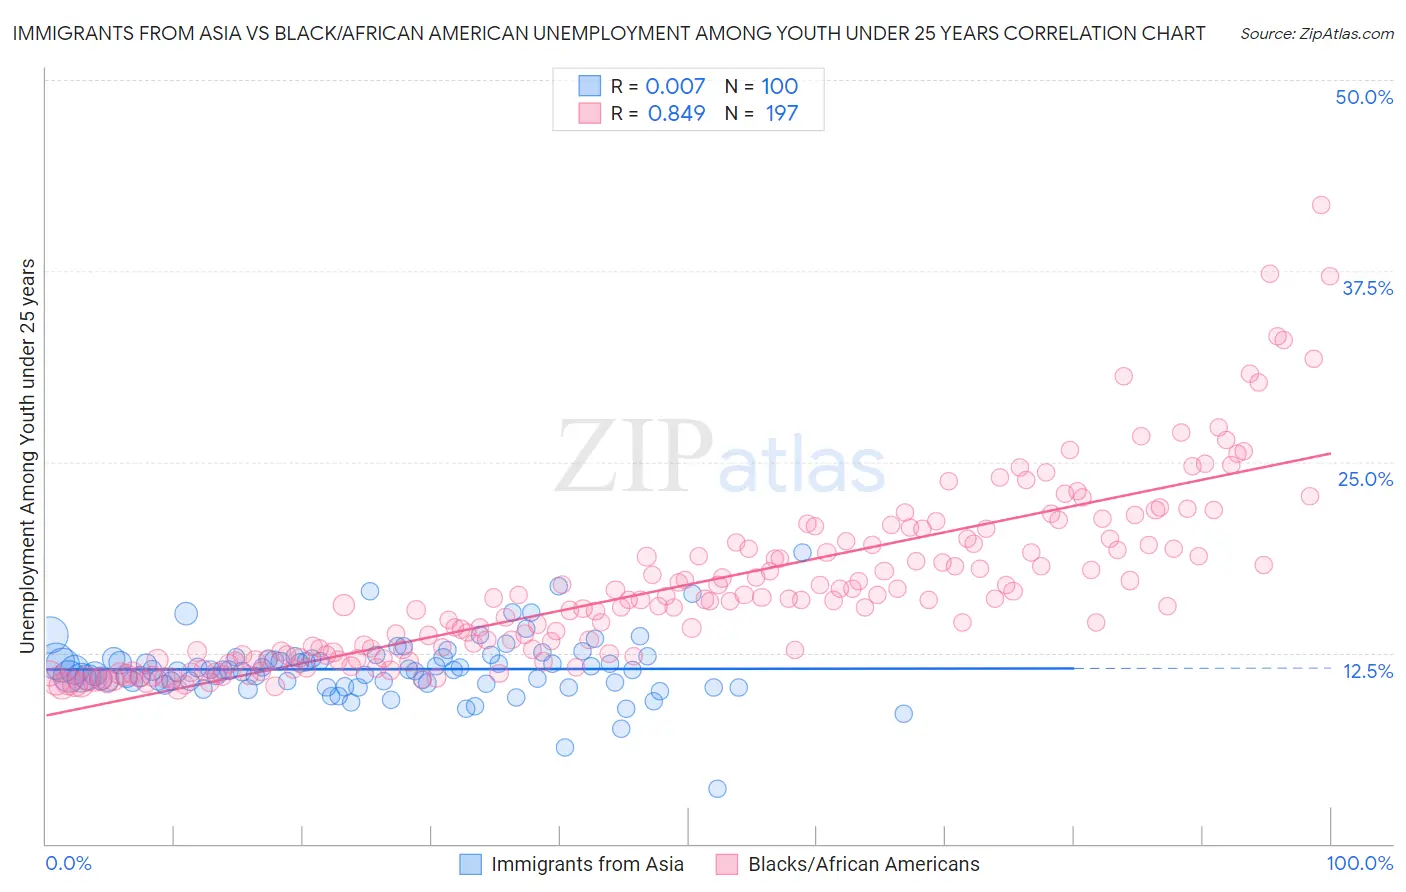 Immigrants from Asia vs Black/African American Unemployment Among Youth under 25 years